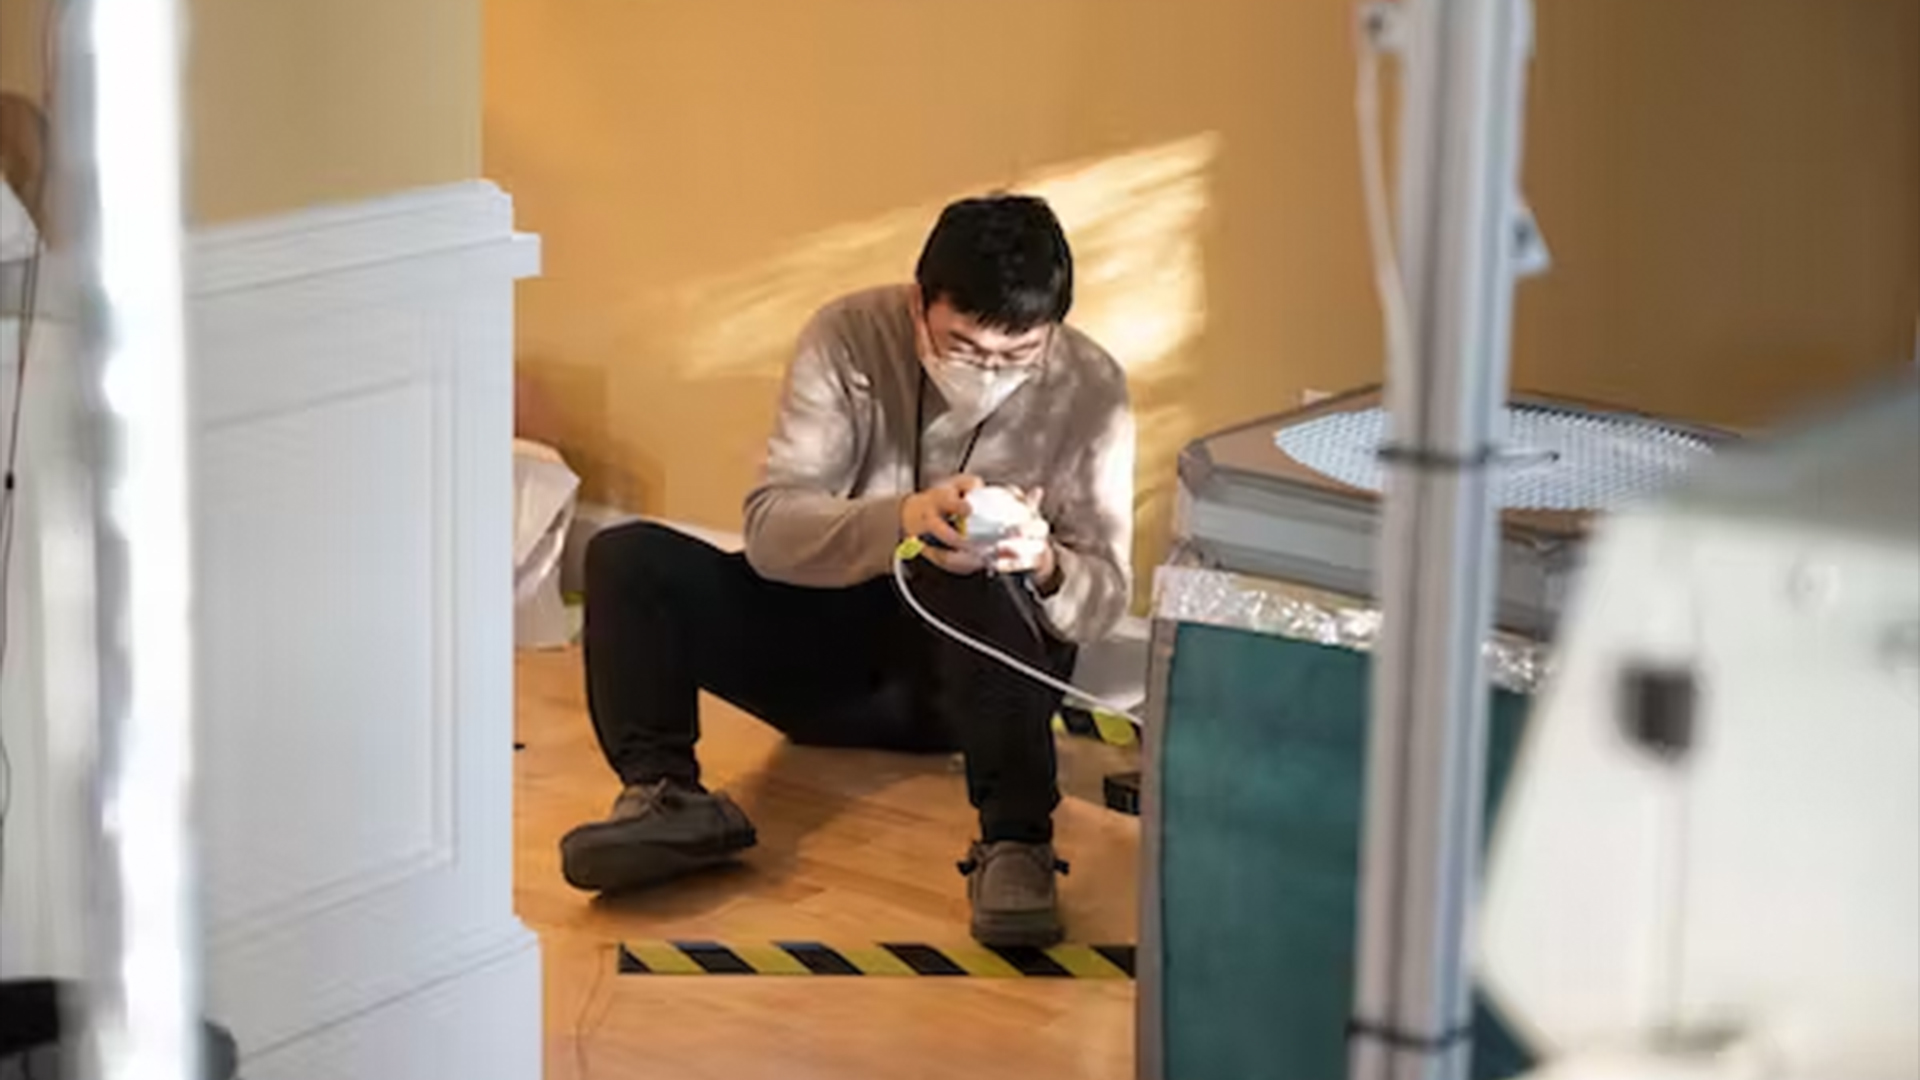 scientist wearing a face mask and glasses sits on the floor of a house while taking samples from a small device in his hands